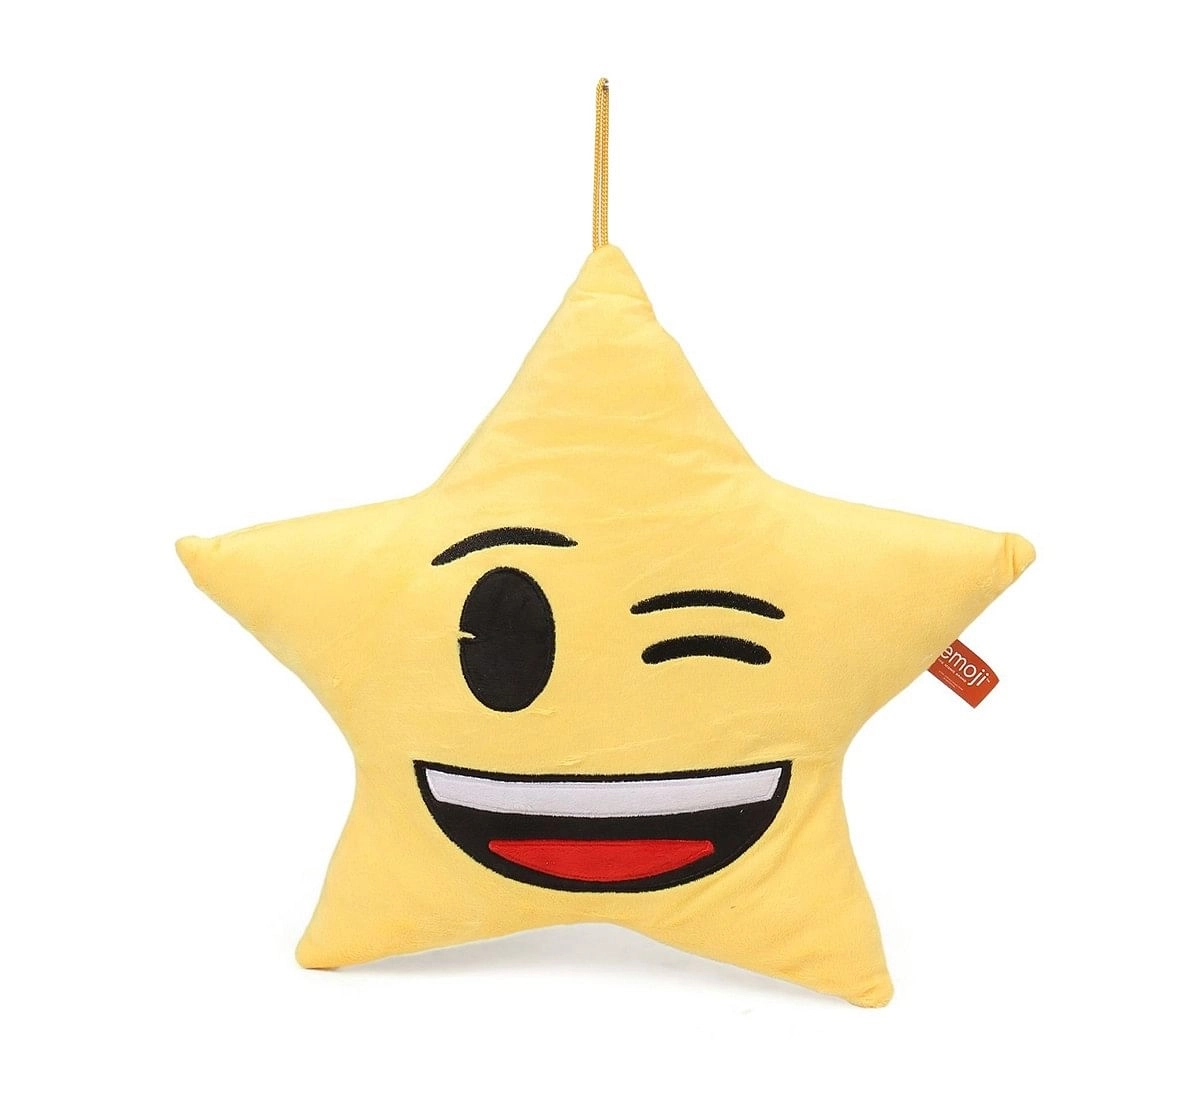  My Baby Excel Emoji Star Winking Eyes Face 30 Cm Plush Accessory for Kids age 1Y+  (Yellow)